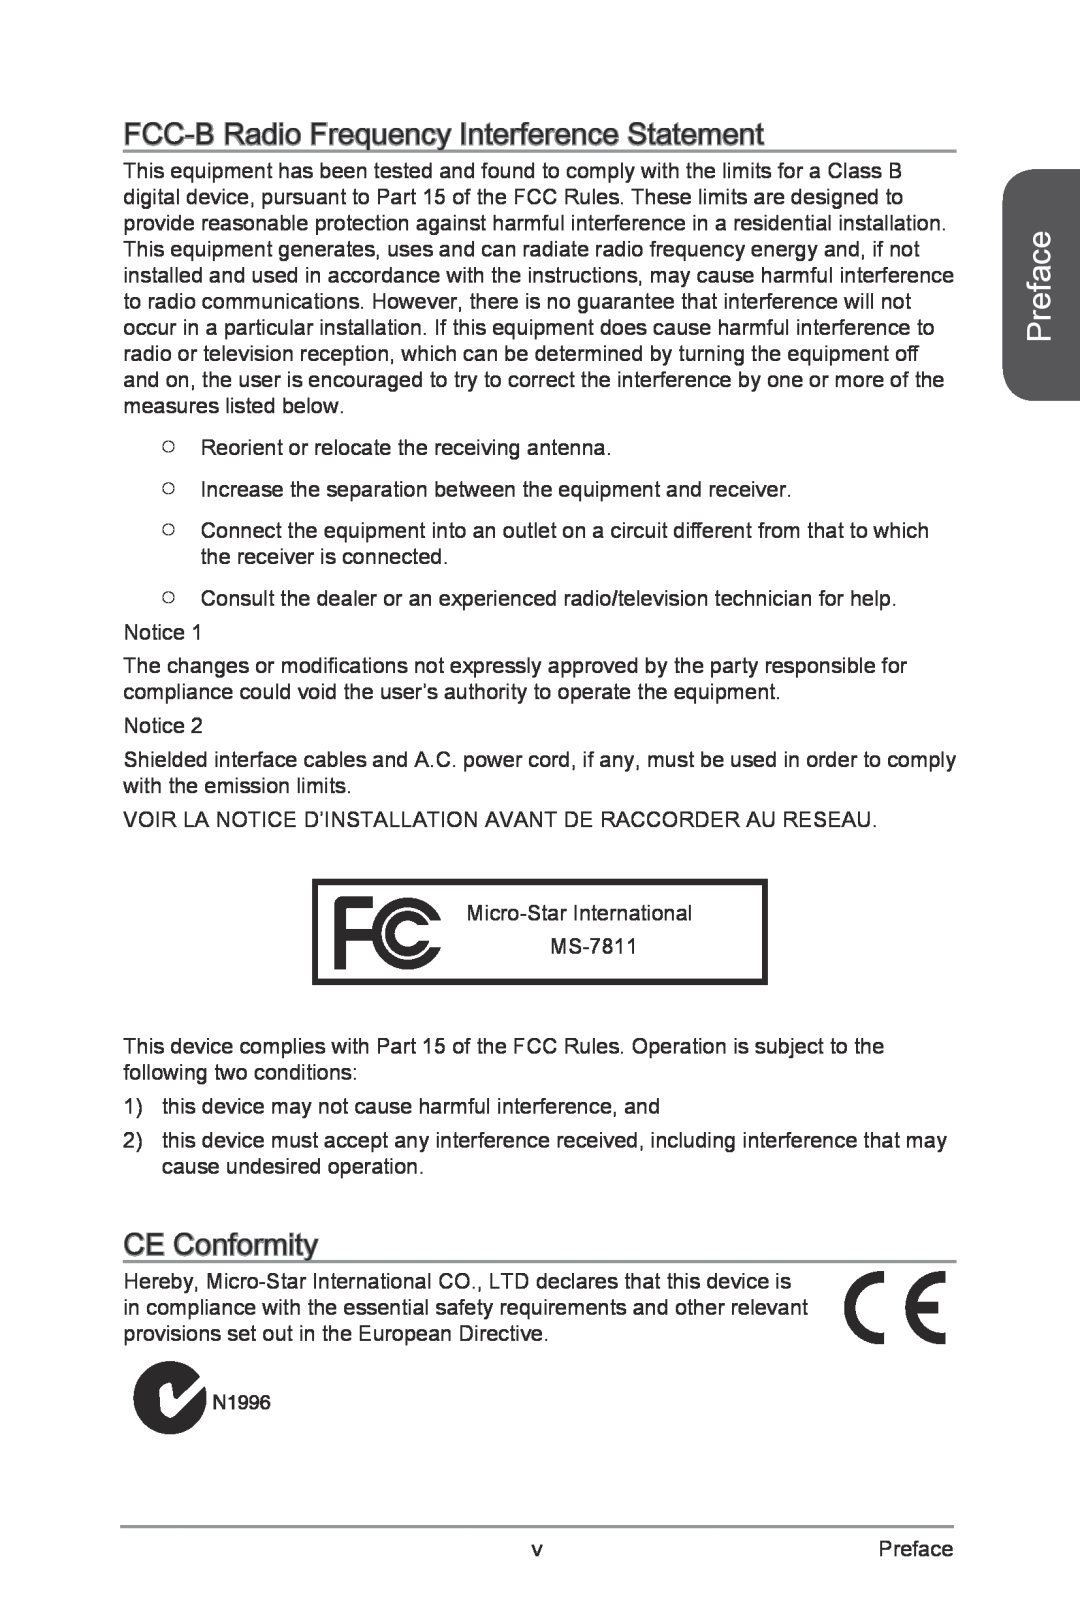 MSI Z87-XPOWER manual FCC-B Radio Frequency Interference Statement, CE Conformity, Preface 